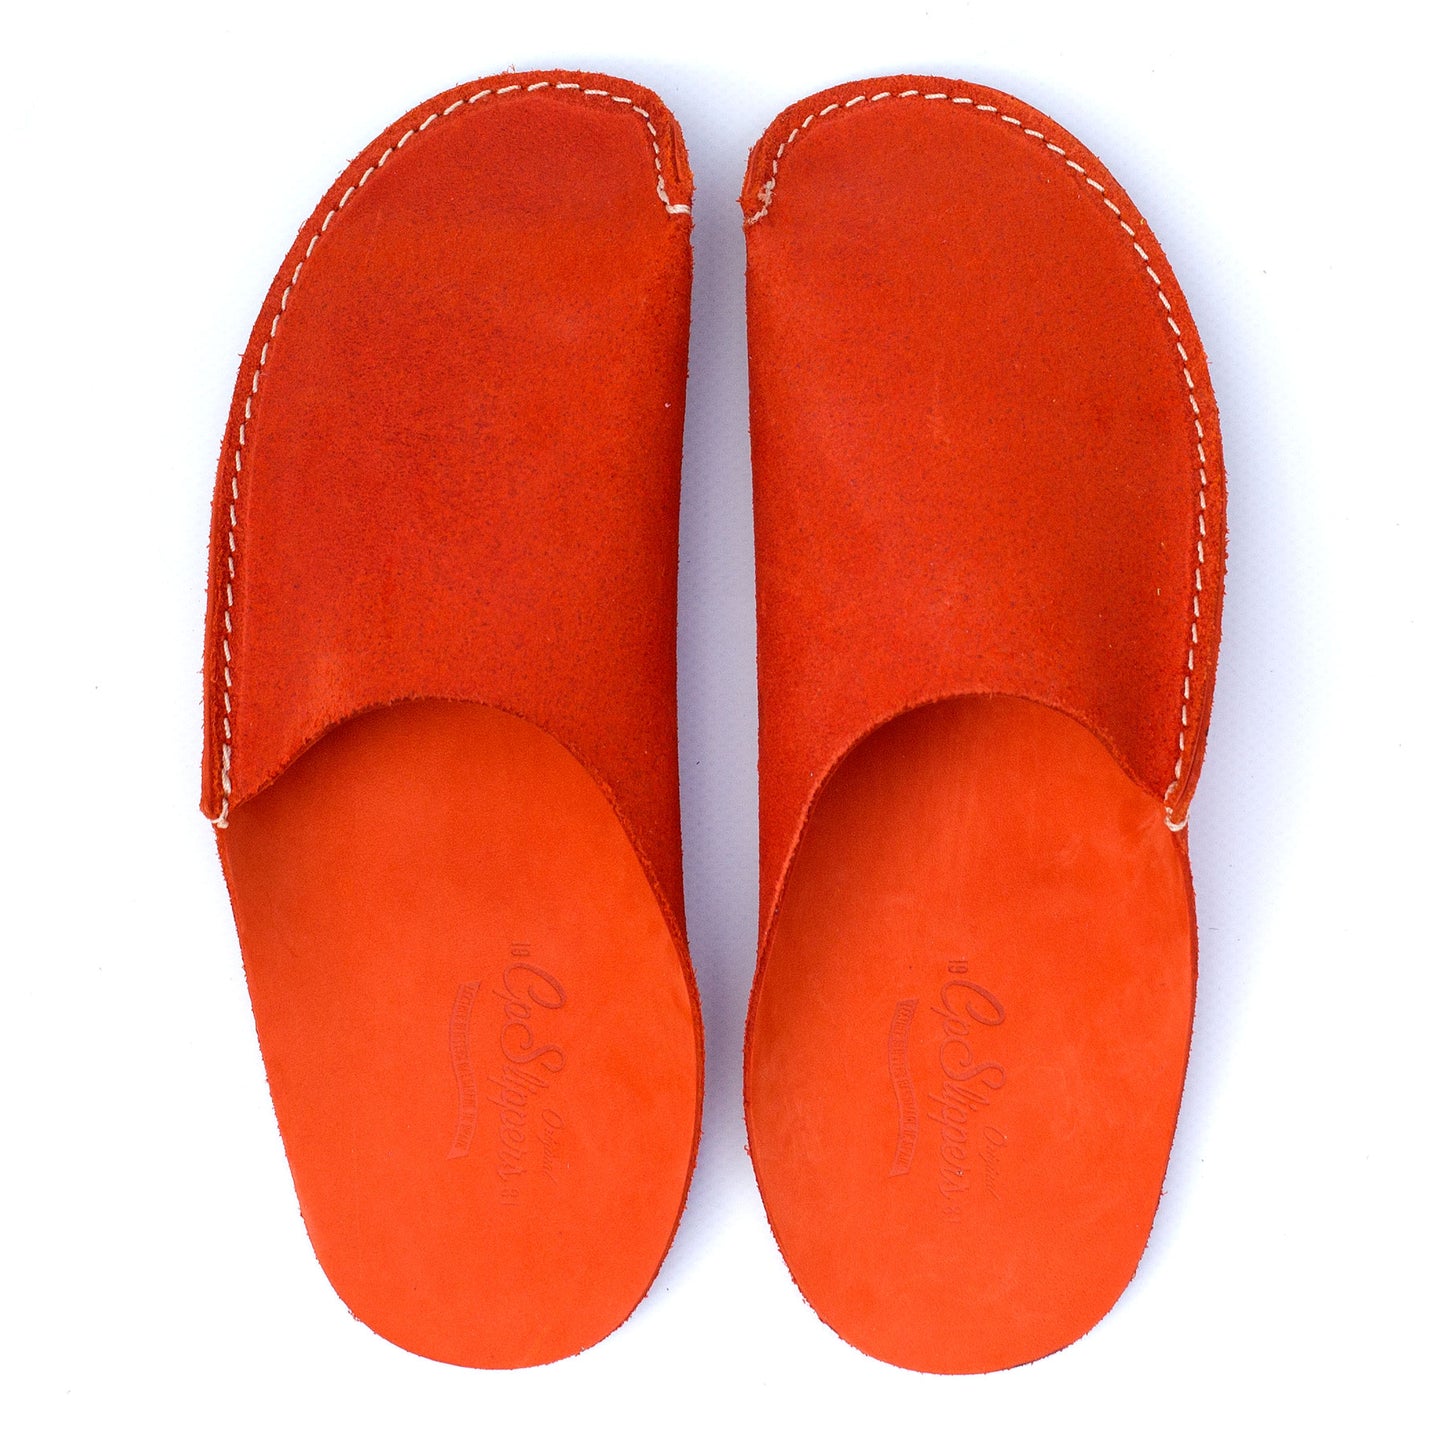 Orange CP Slippers Minimalist for man and woman